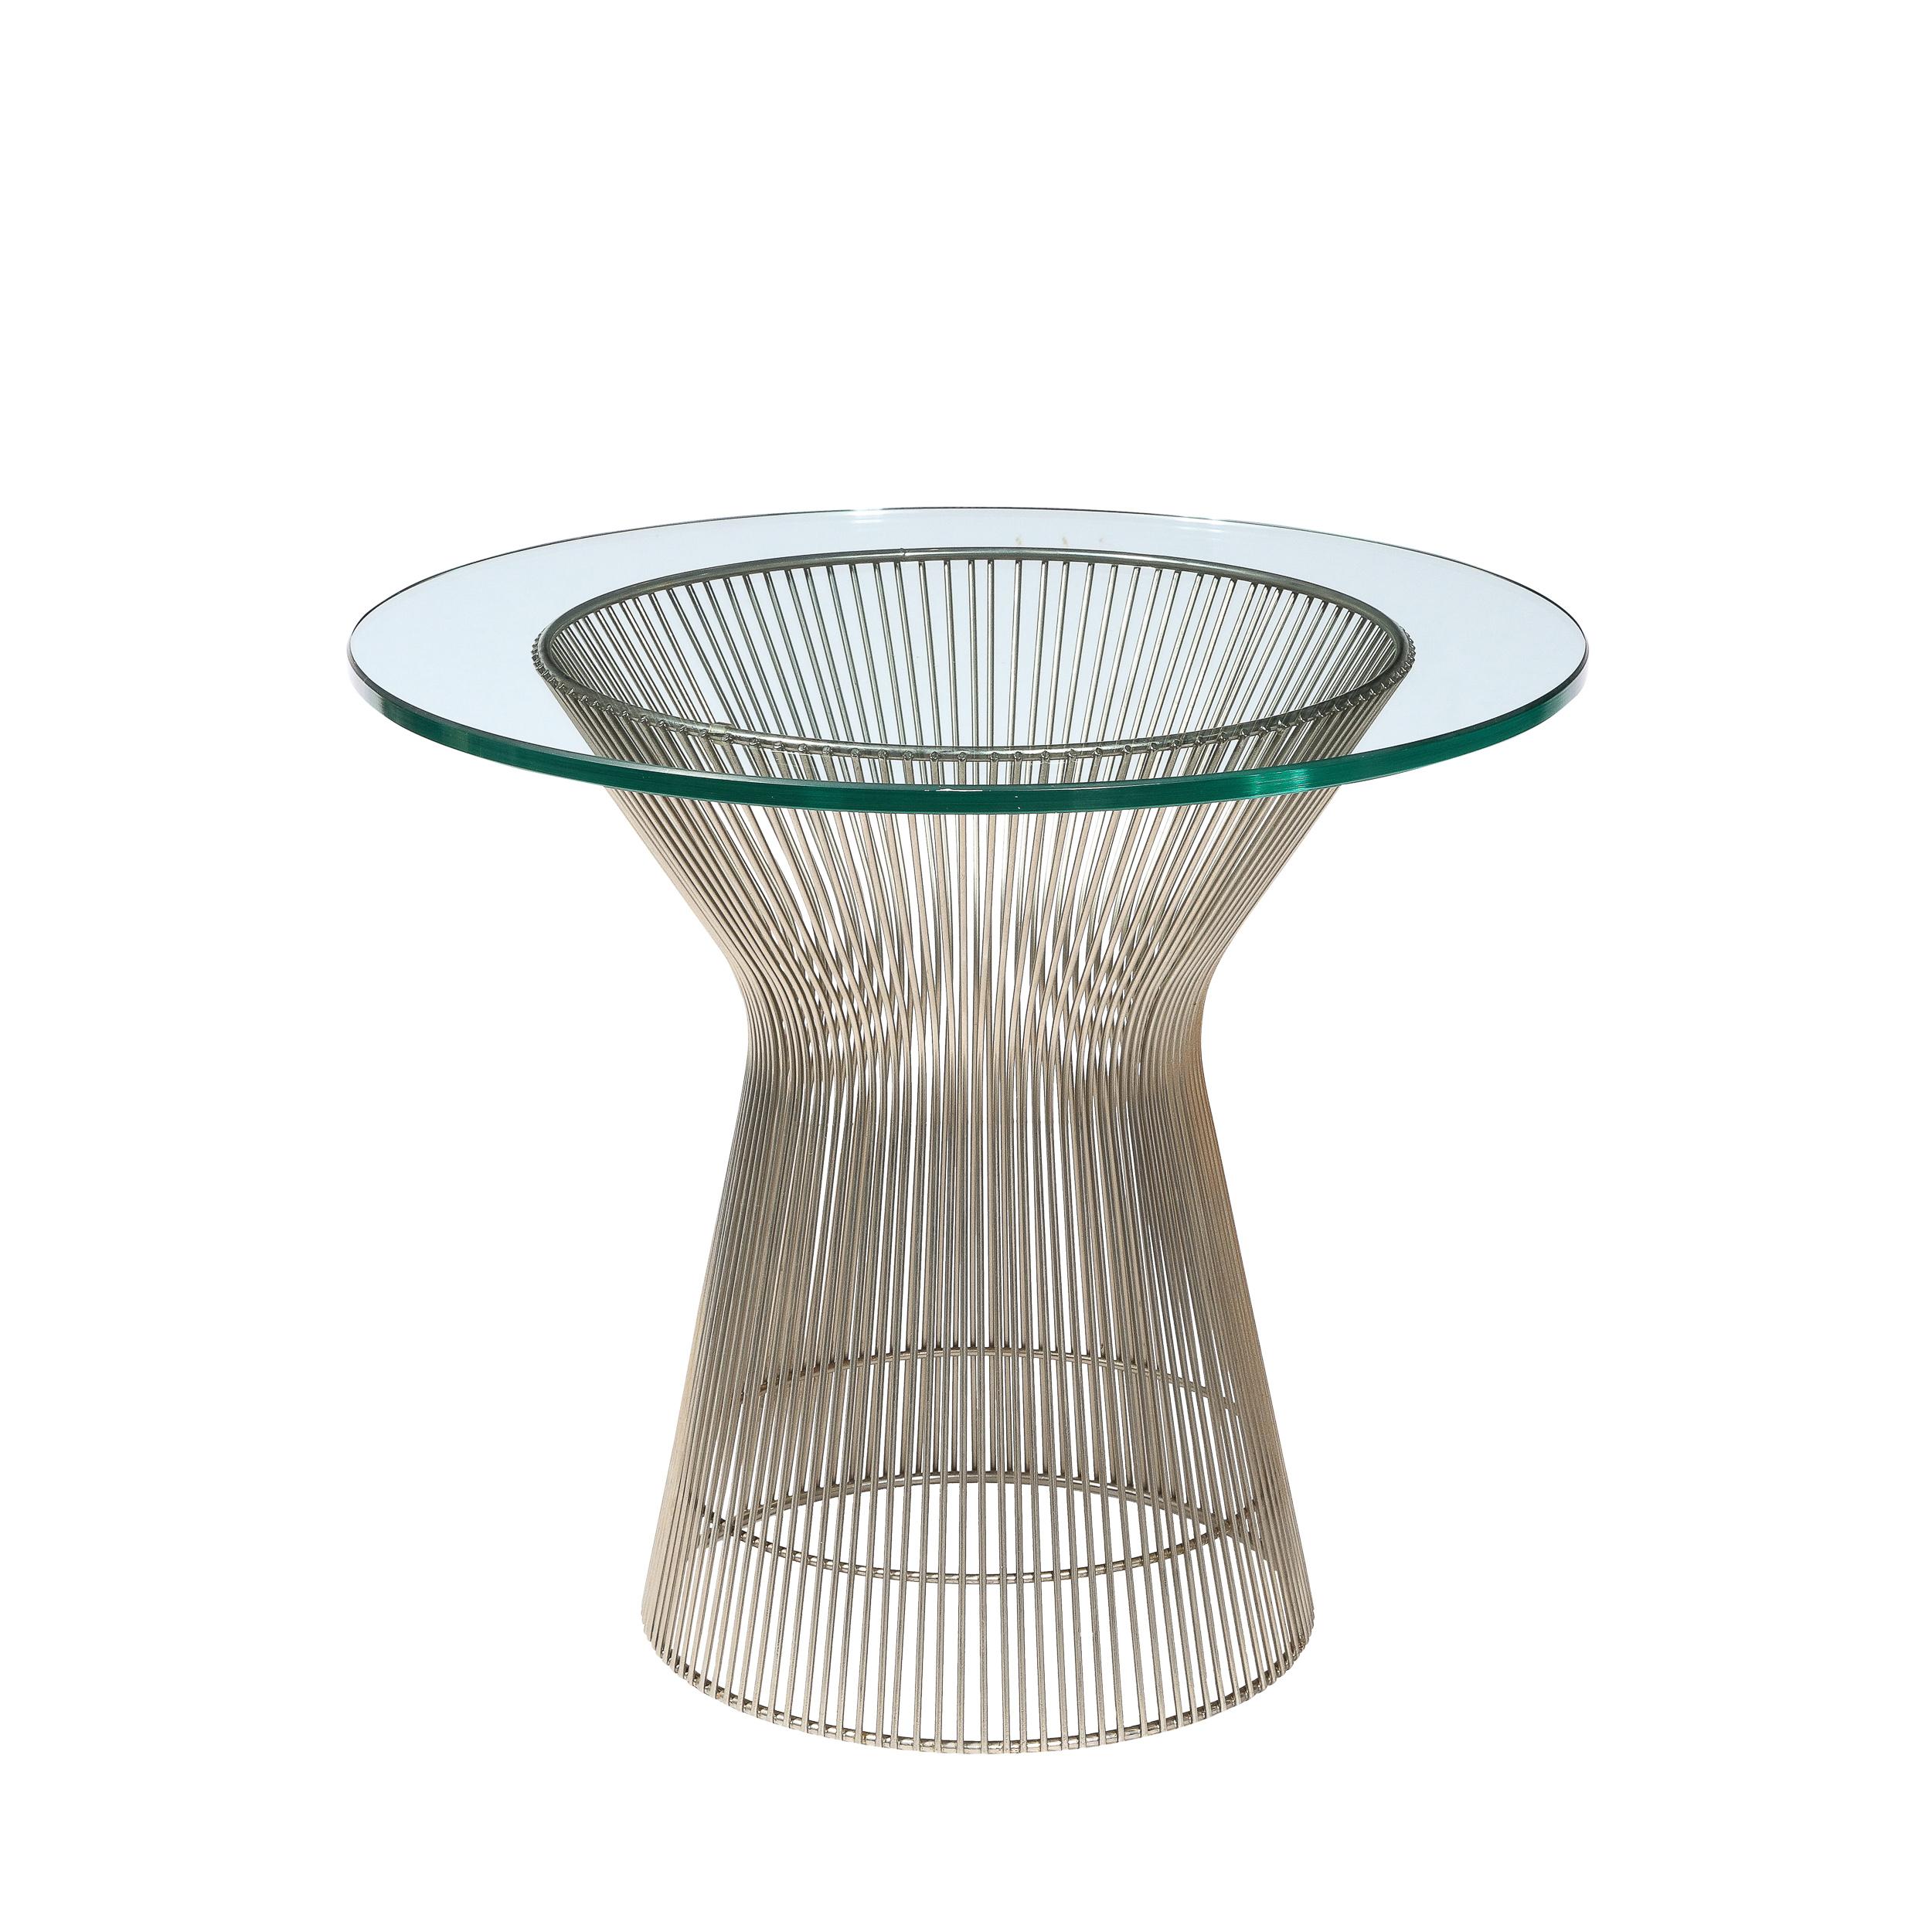 These Bent and Polished Nickel side Tables designed by Warren Platner originate from the United States, Circa 1970. Featuring an hourglass form in a series of parallel nickel cylinders, their geometric minimalist construction is characteristic of